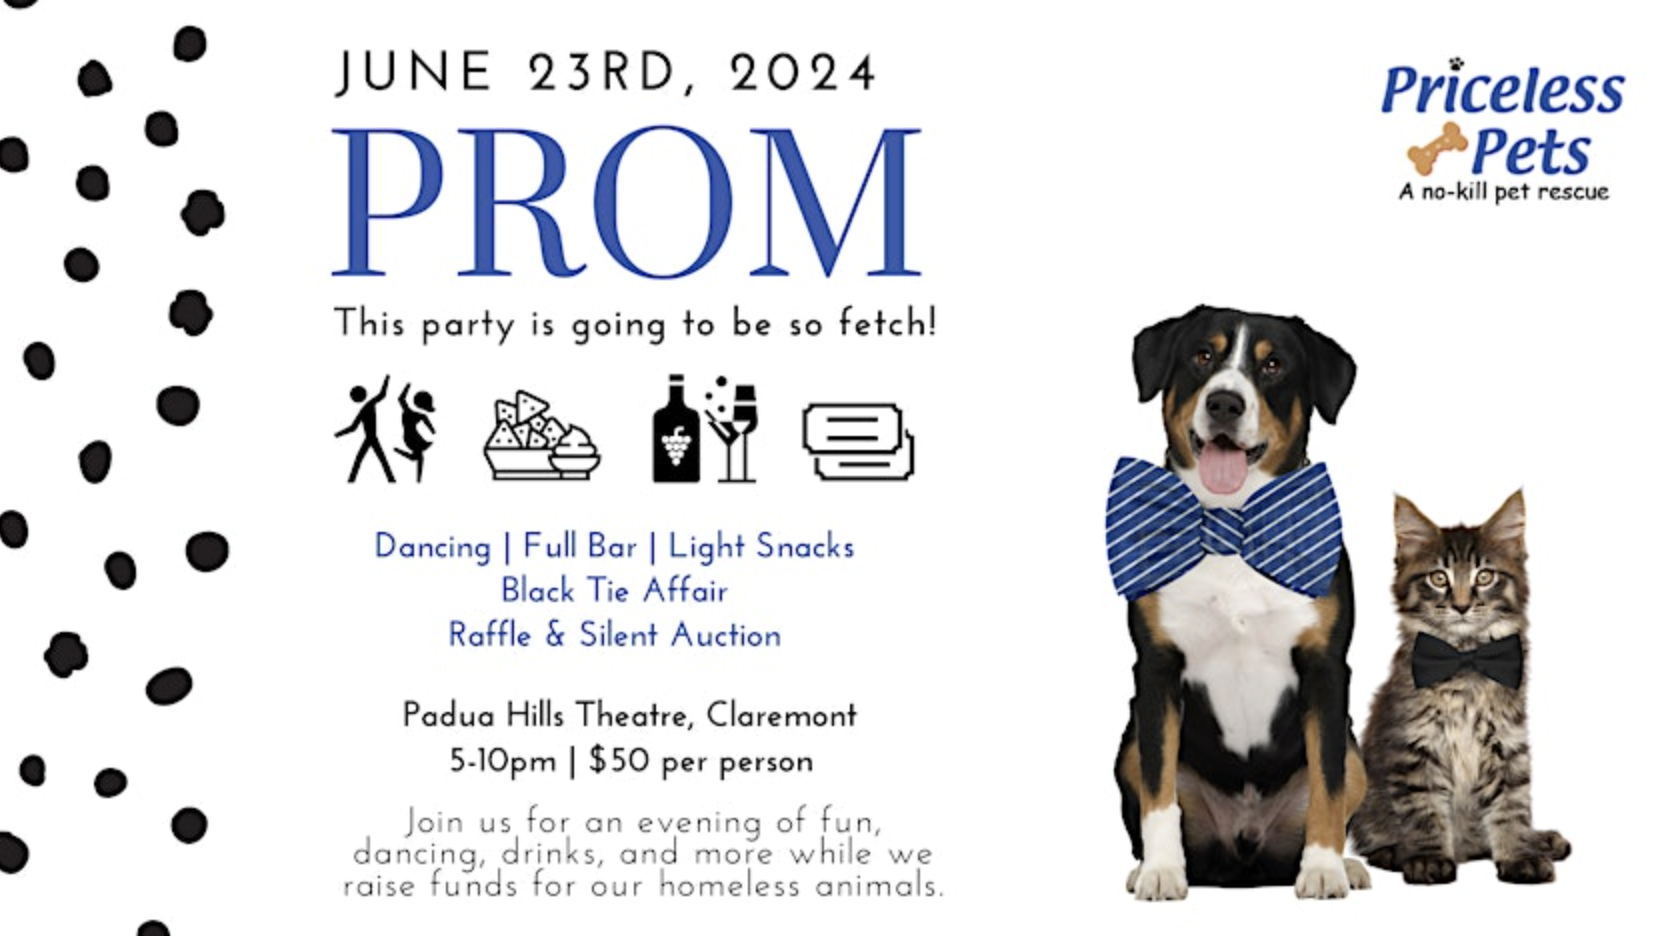 **Event: PROM by Priceless Pets**

**Date:** June 23, 2024 
**Time:** 5-10 PM 

**Location:** Padua Hills Theatre, Claremont

**Details:**
- Dancing
- Bar
- Snacks
- Silent Auction
- Raffle

Flyer includes an image of a dog and cat in bowties on the right.